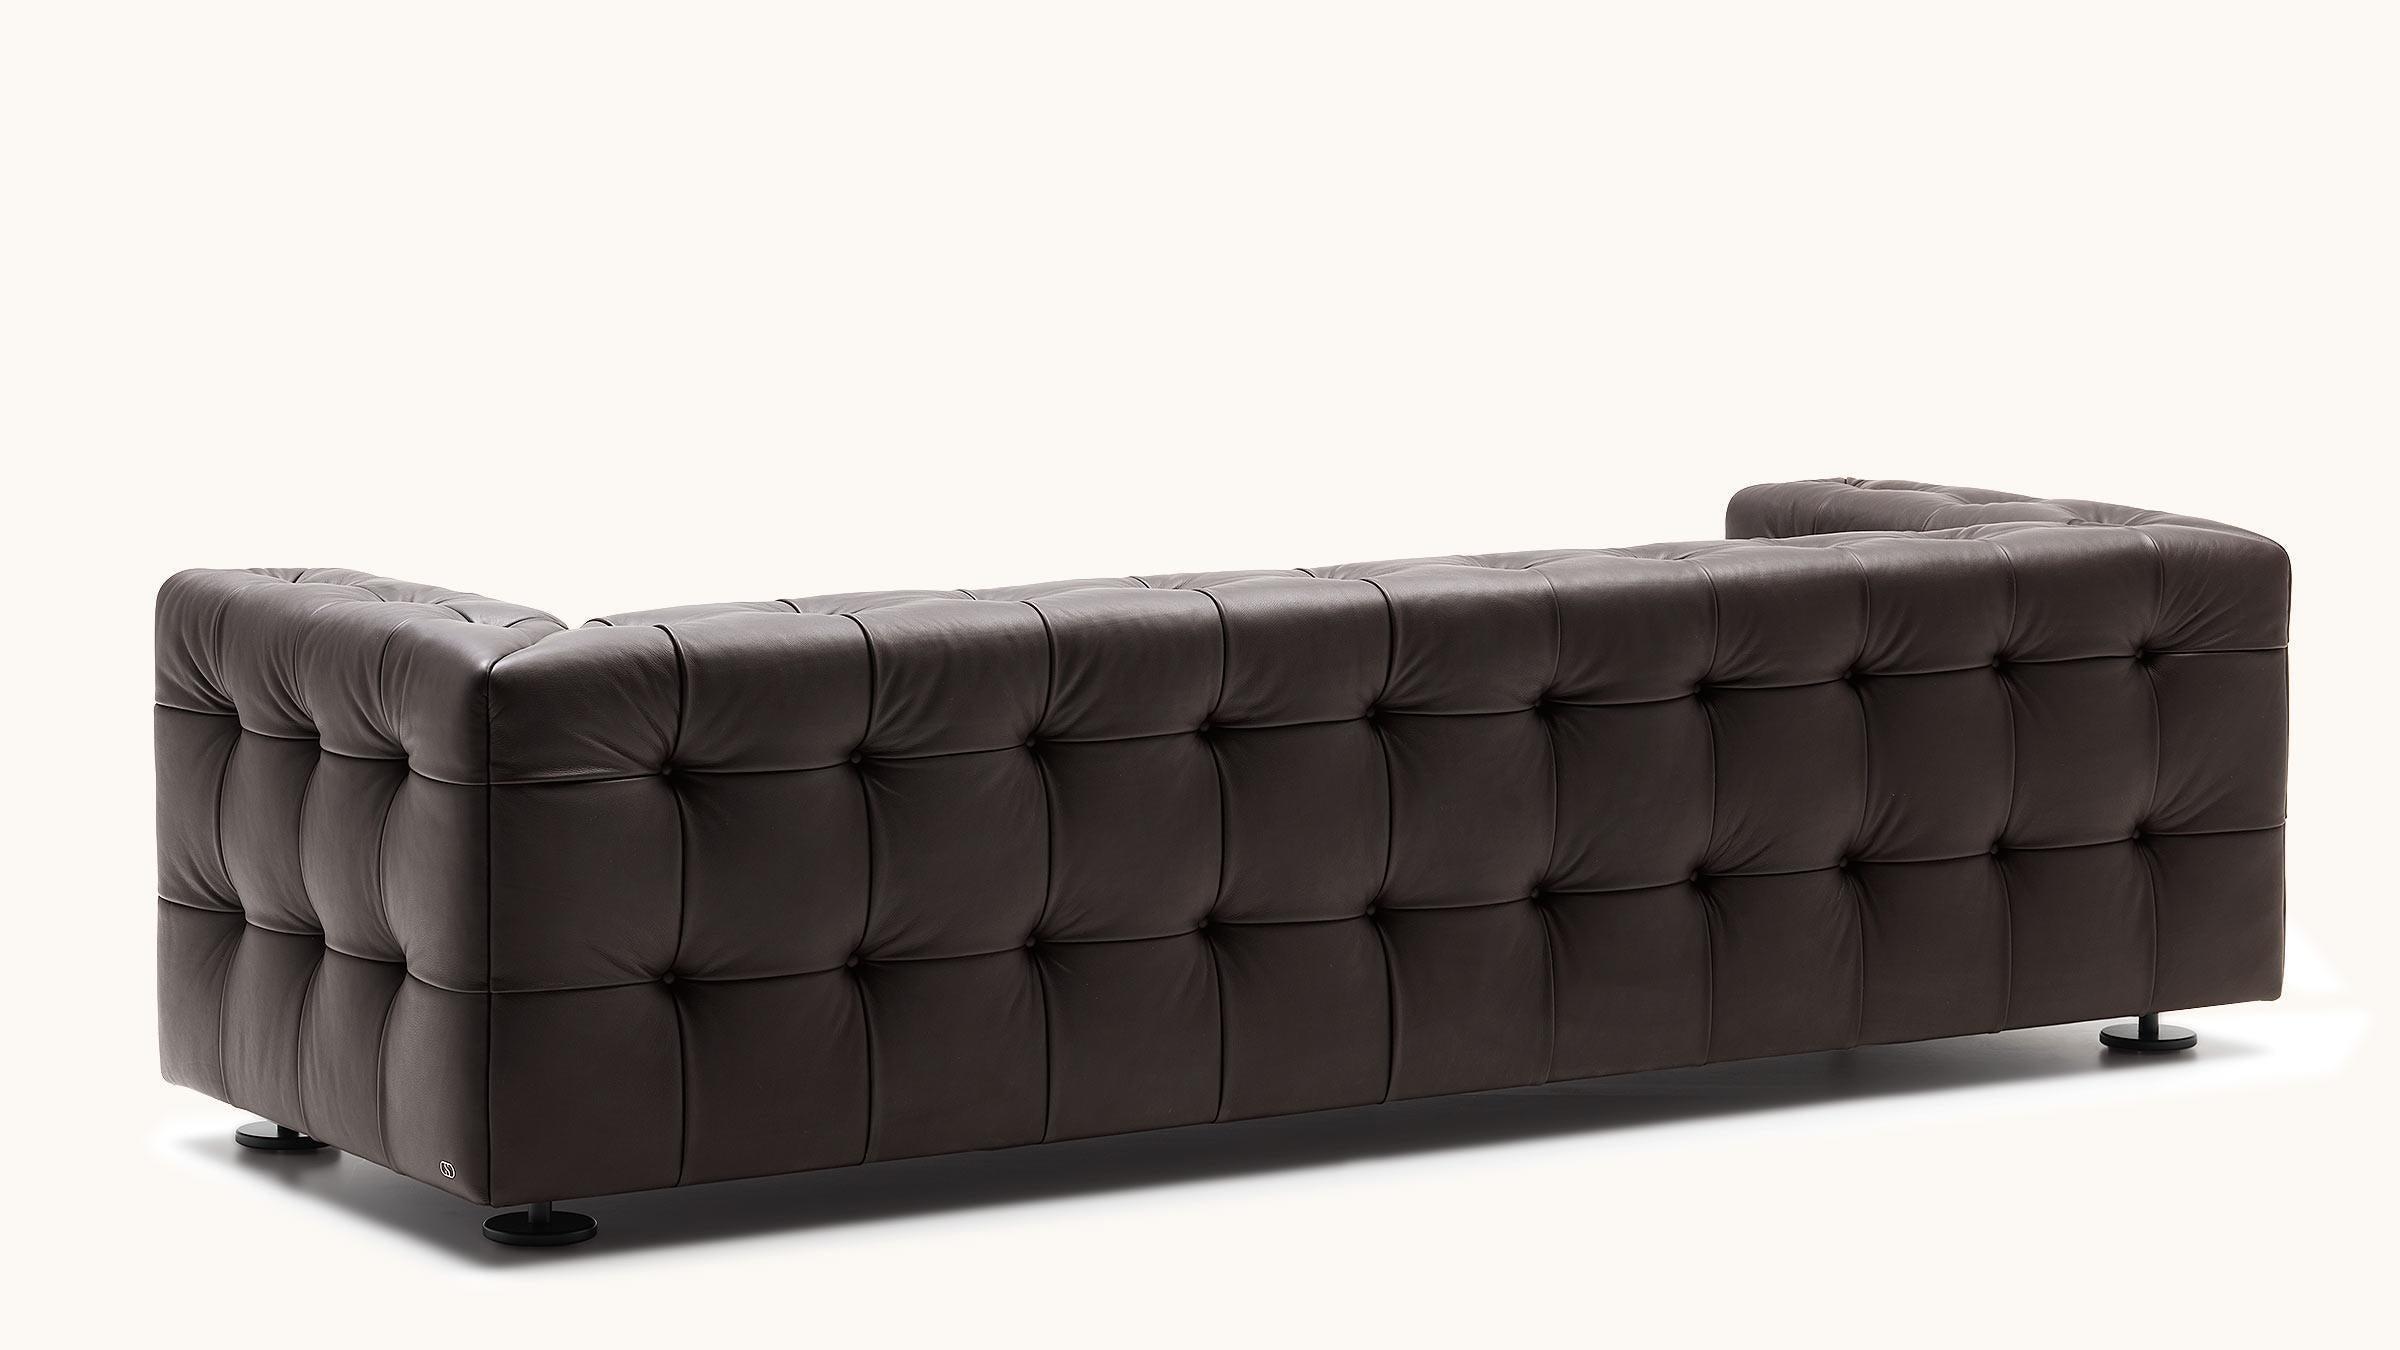 RH-306 is a striking appearance that impresses with craftsman like precision and refined details. The body stands on filigree feet, while the square leather panels harmonize elegantly with the rounded edges of the cubic base body. The sofa, in the